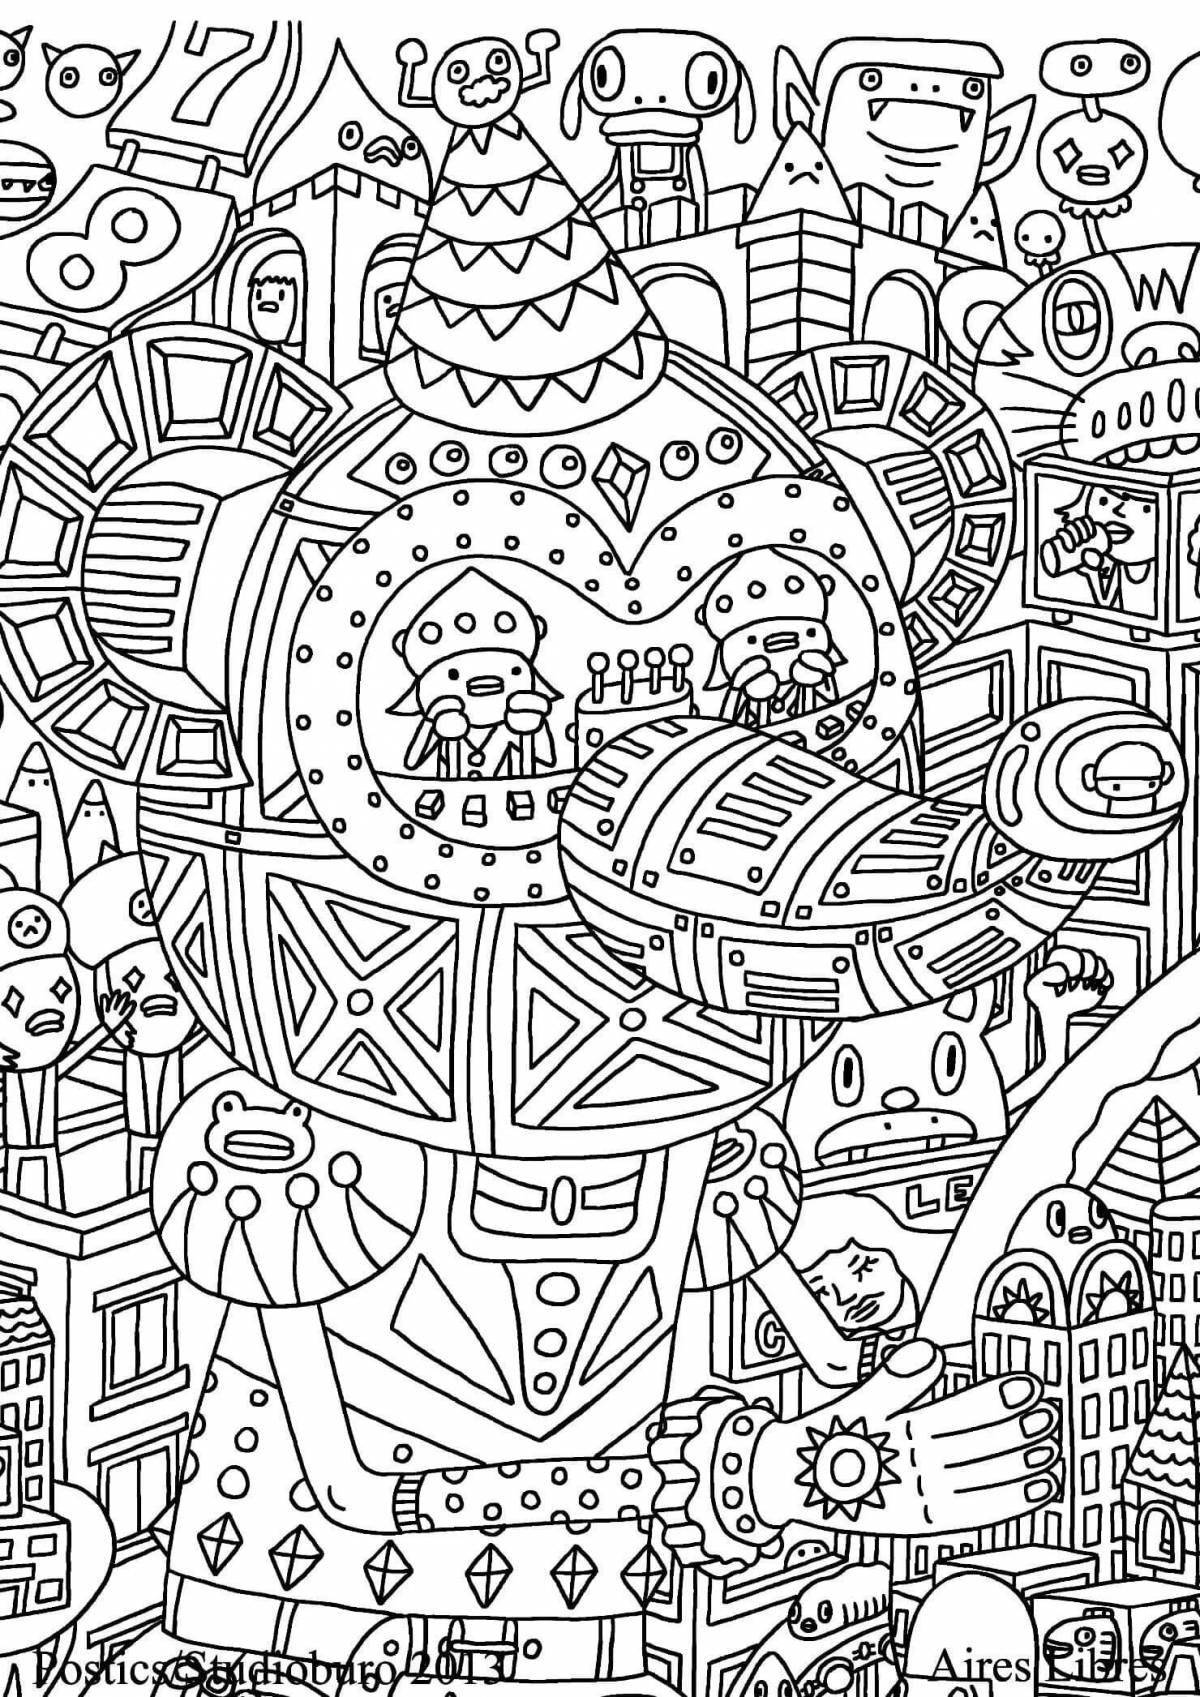 Exquisite coloring book is the coolest in the world